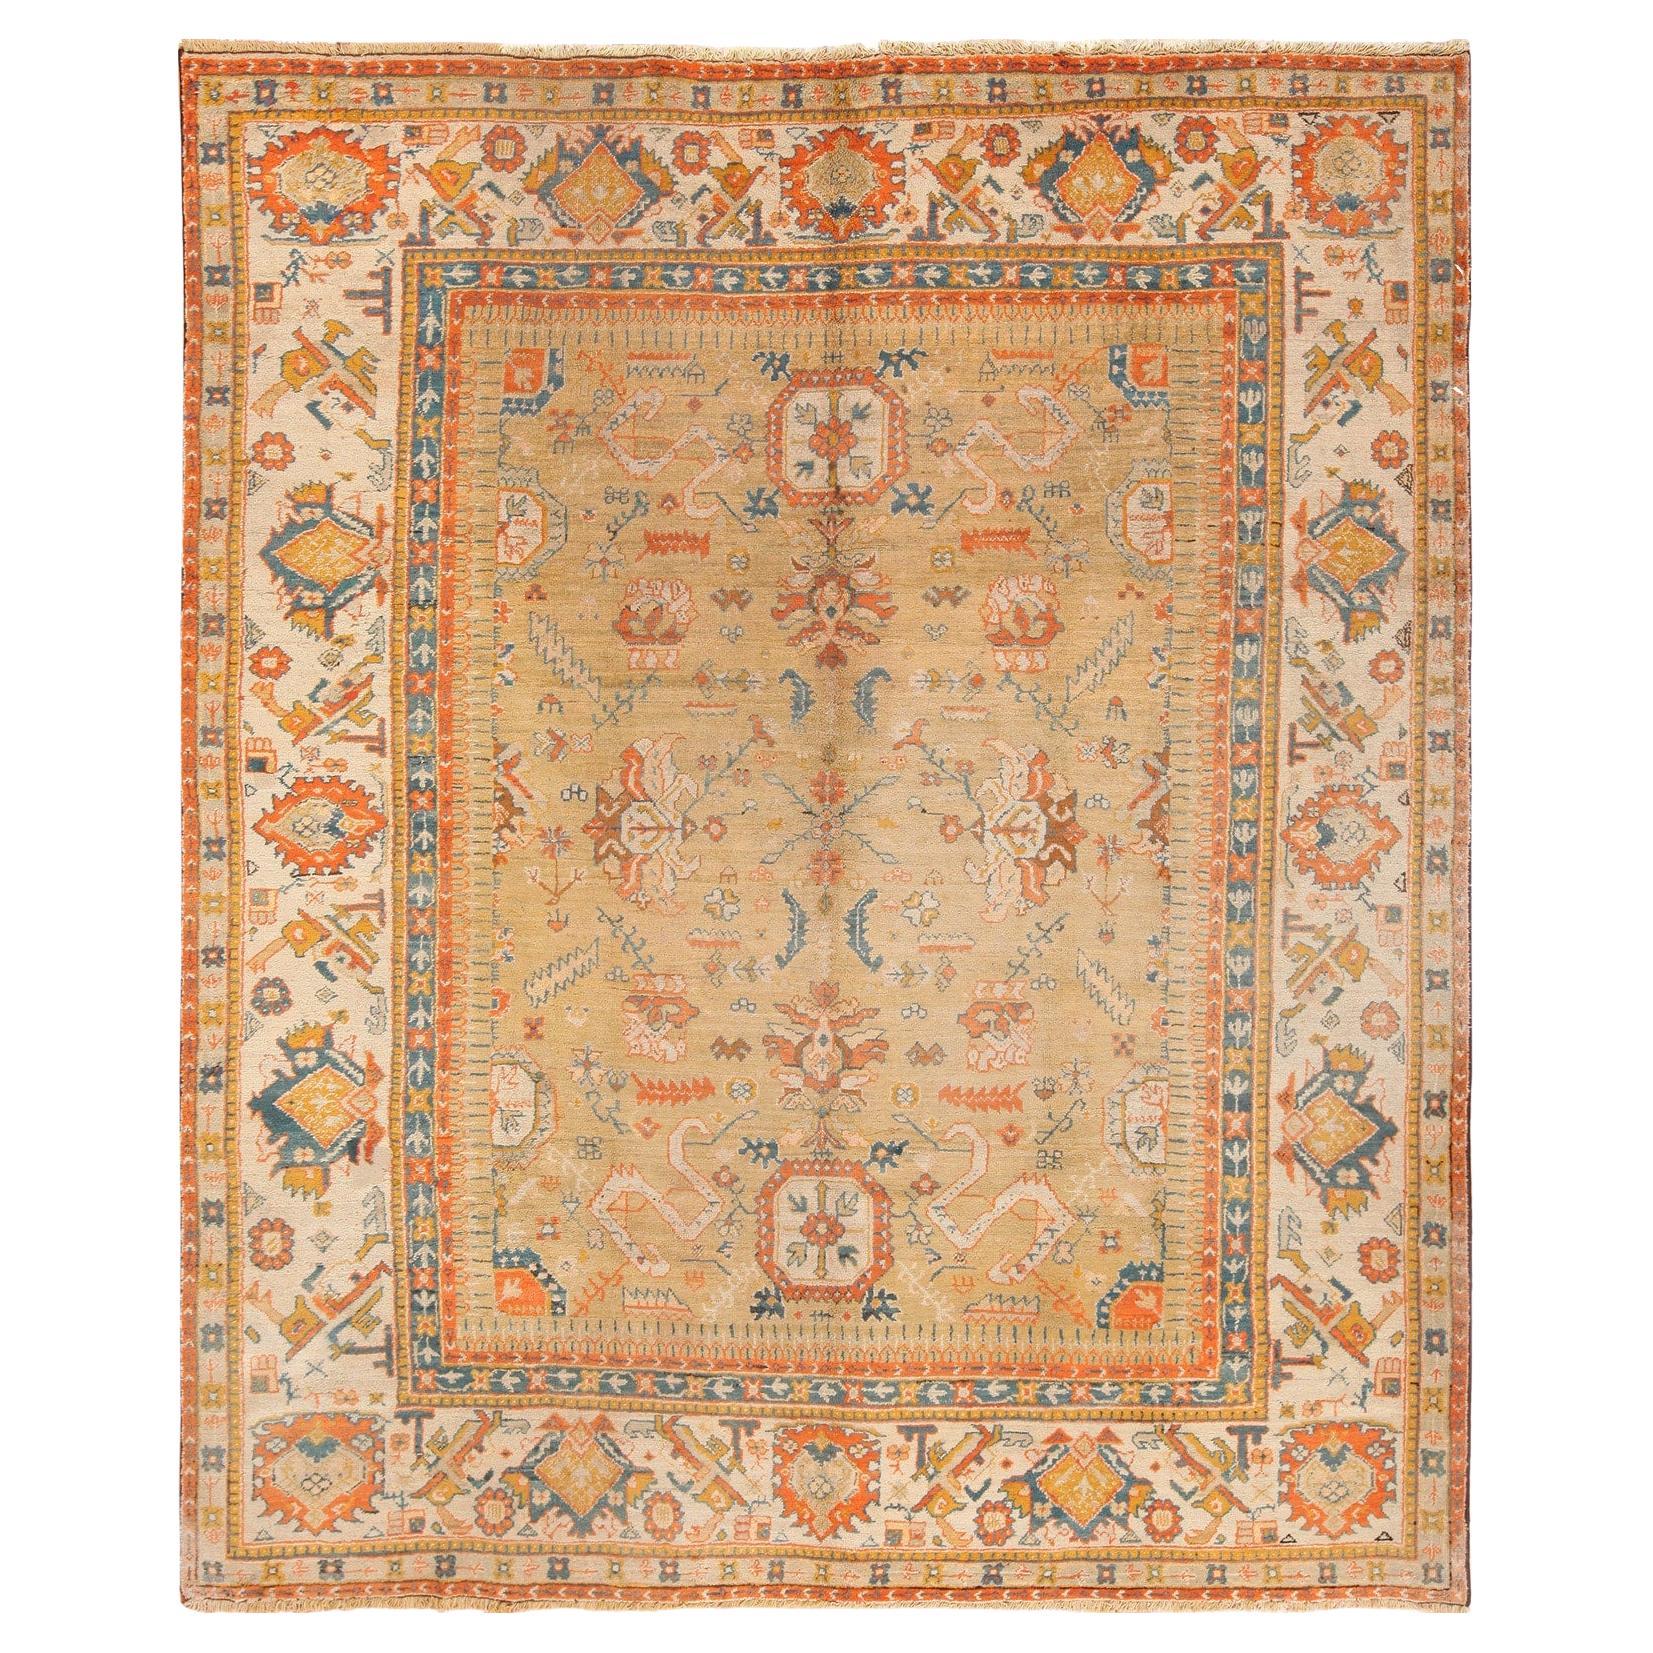 Antique Turkish Oushak Rug. Size: 9 ft 4 in x 11 ft 8 in